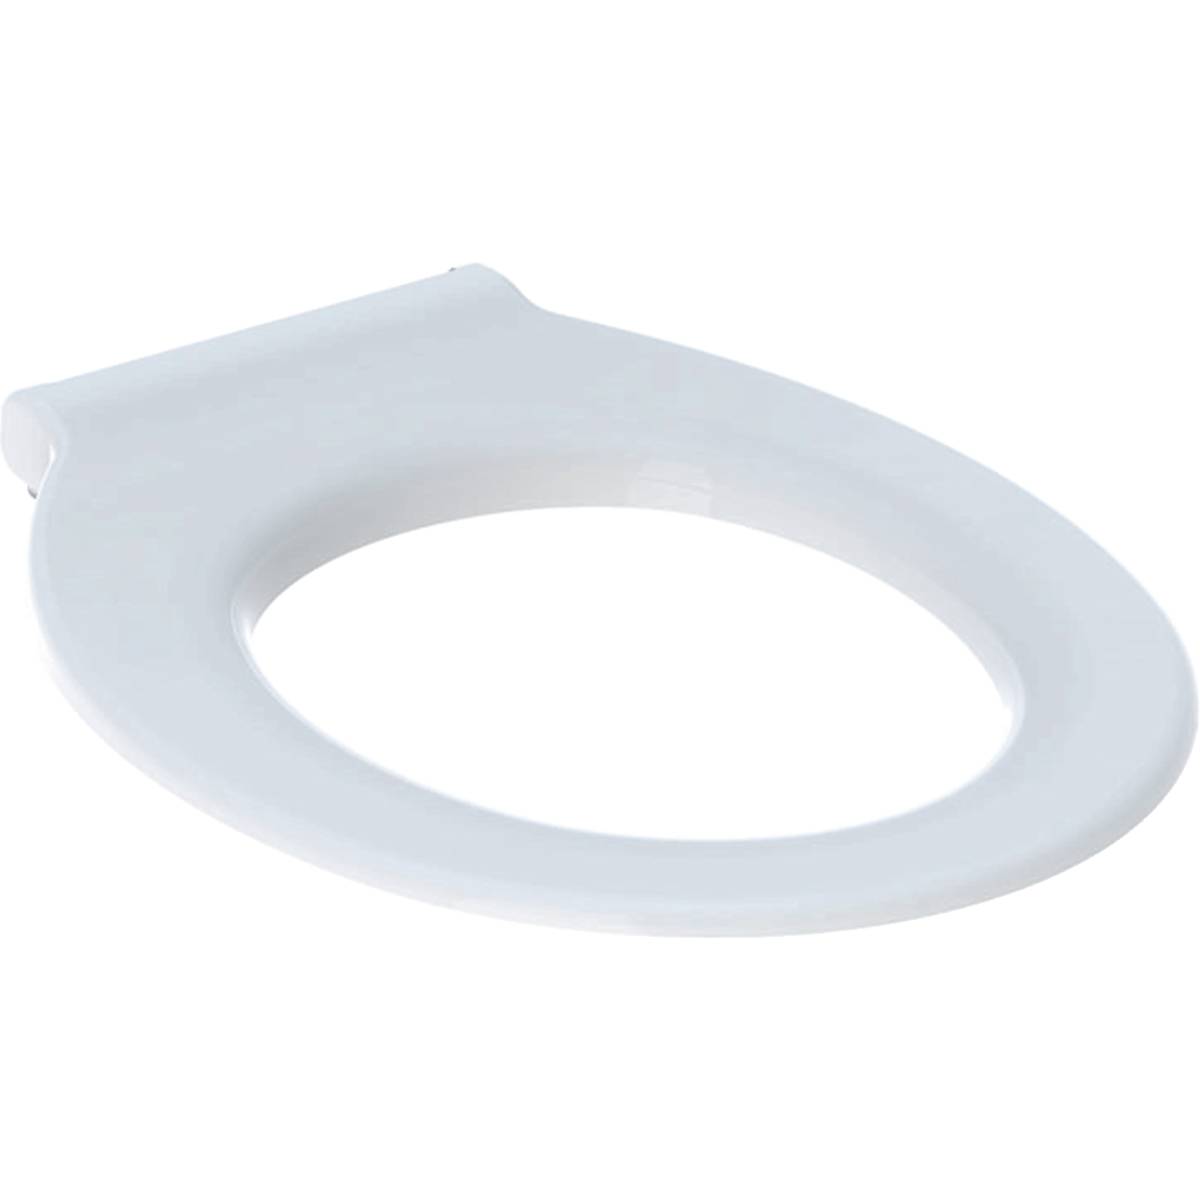 Selnova Comfort WC seat ring, barrier-free, antibacterial, fastening from above